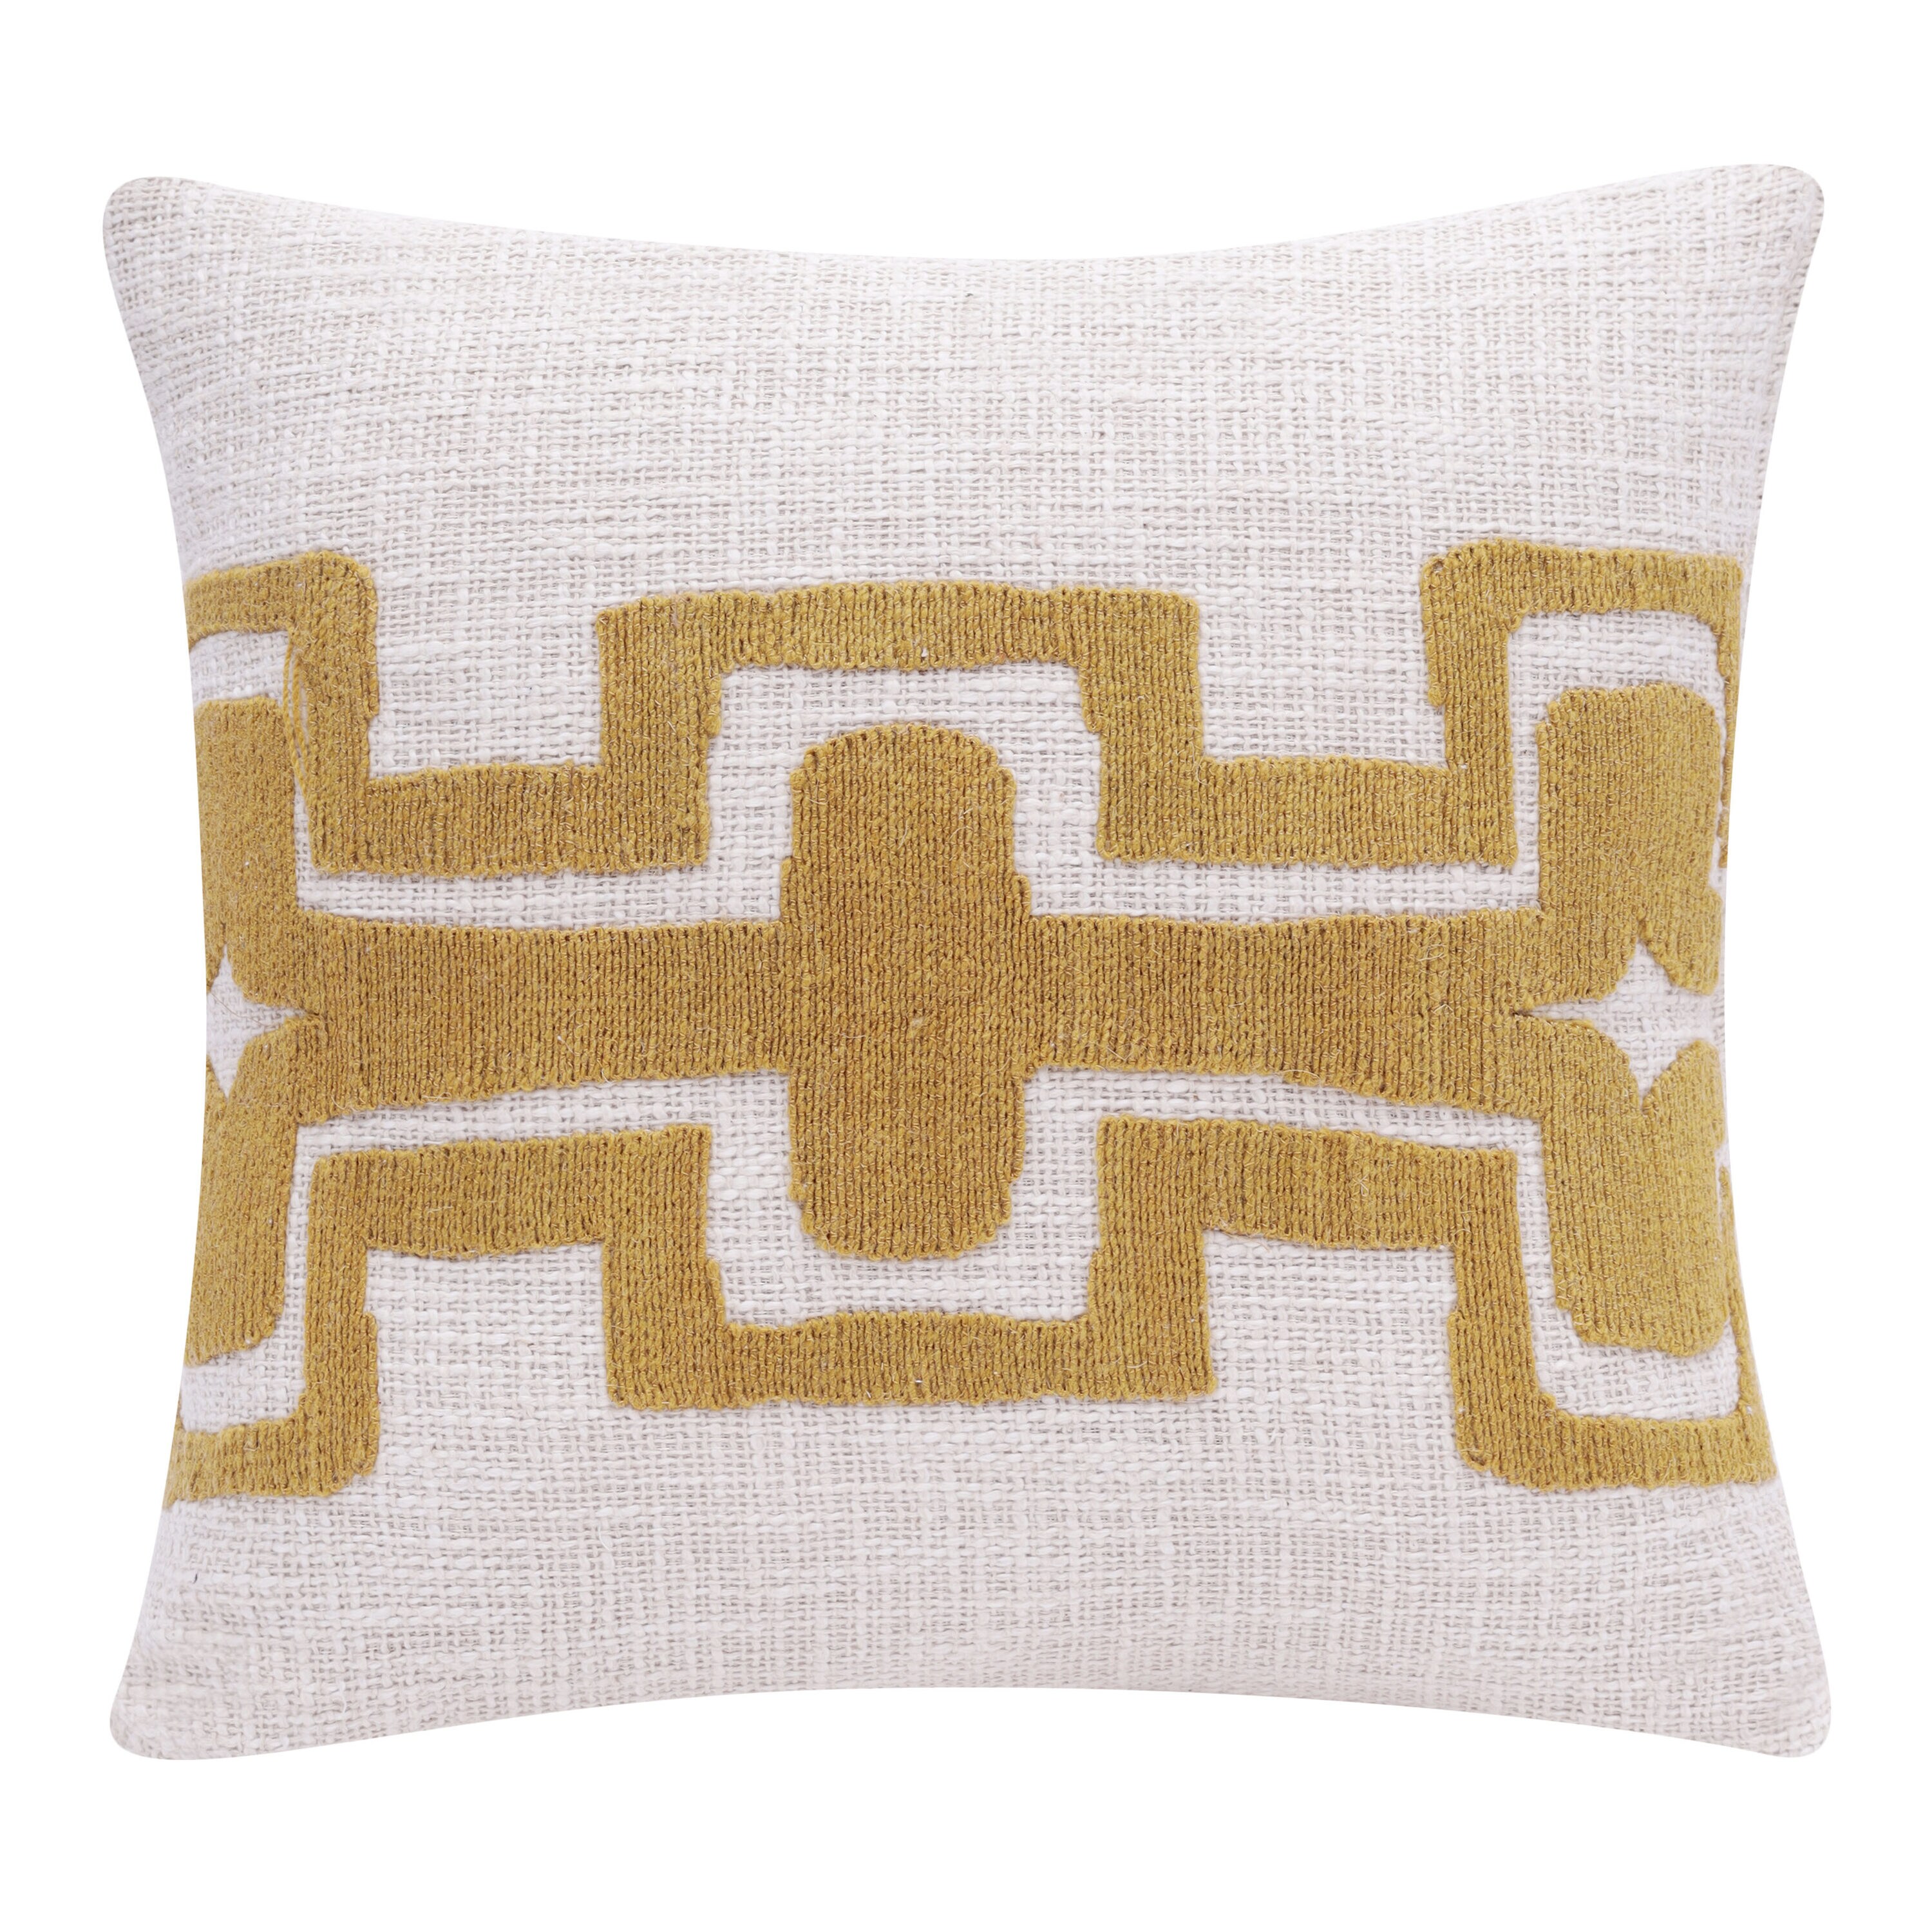 LR Home Stacy Garcia 20-in x 20-in Ochre/Ivory Indoor Decorative Pillow in Yellow | 3752A0590304J8